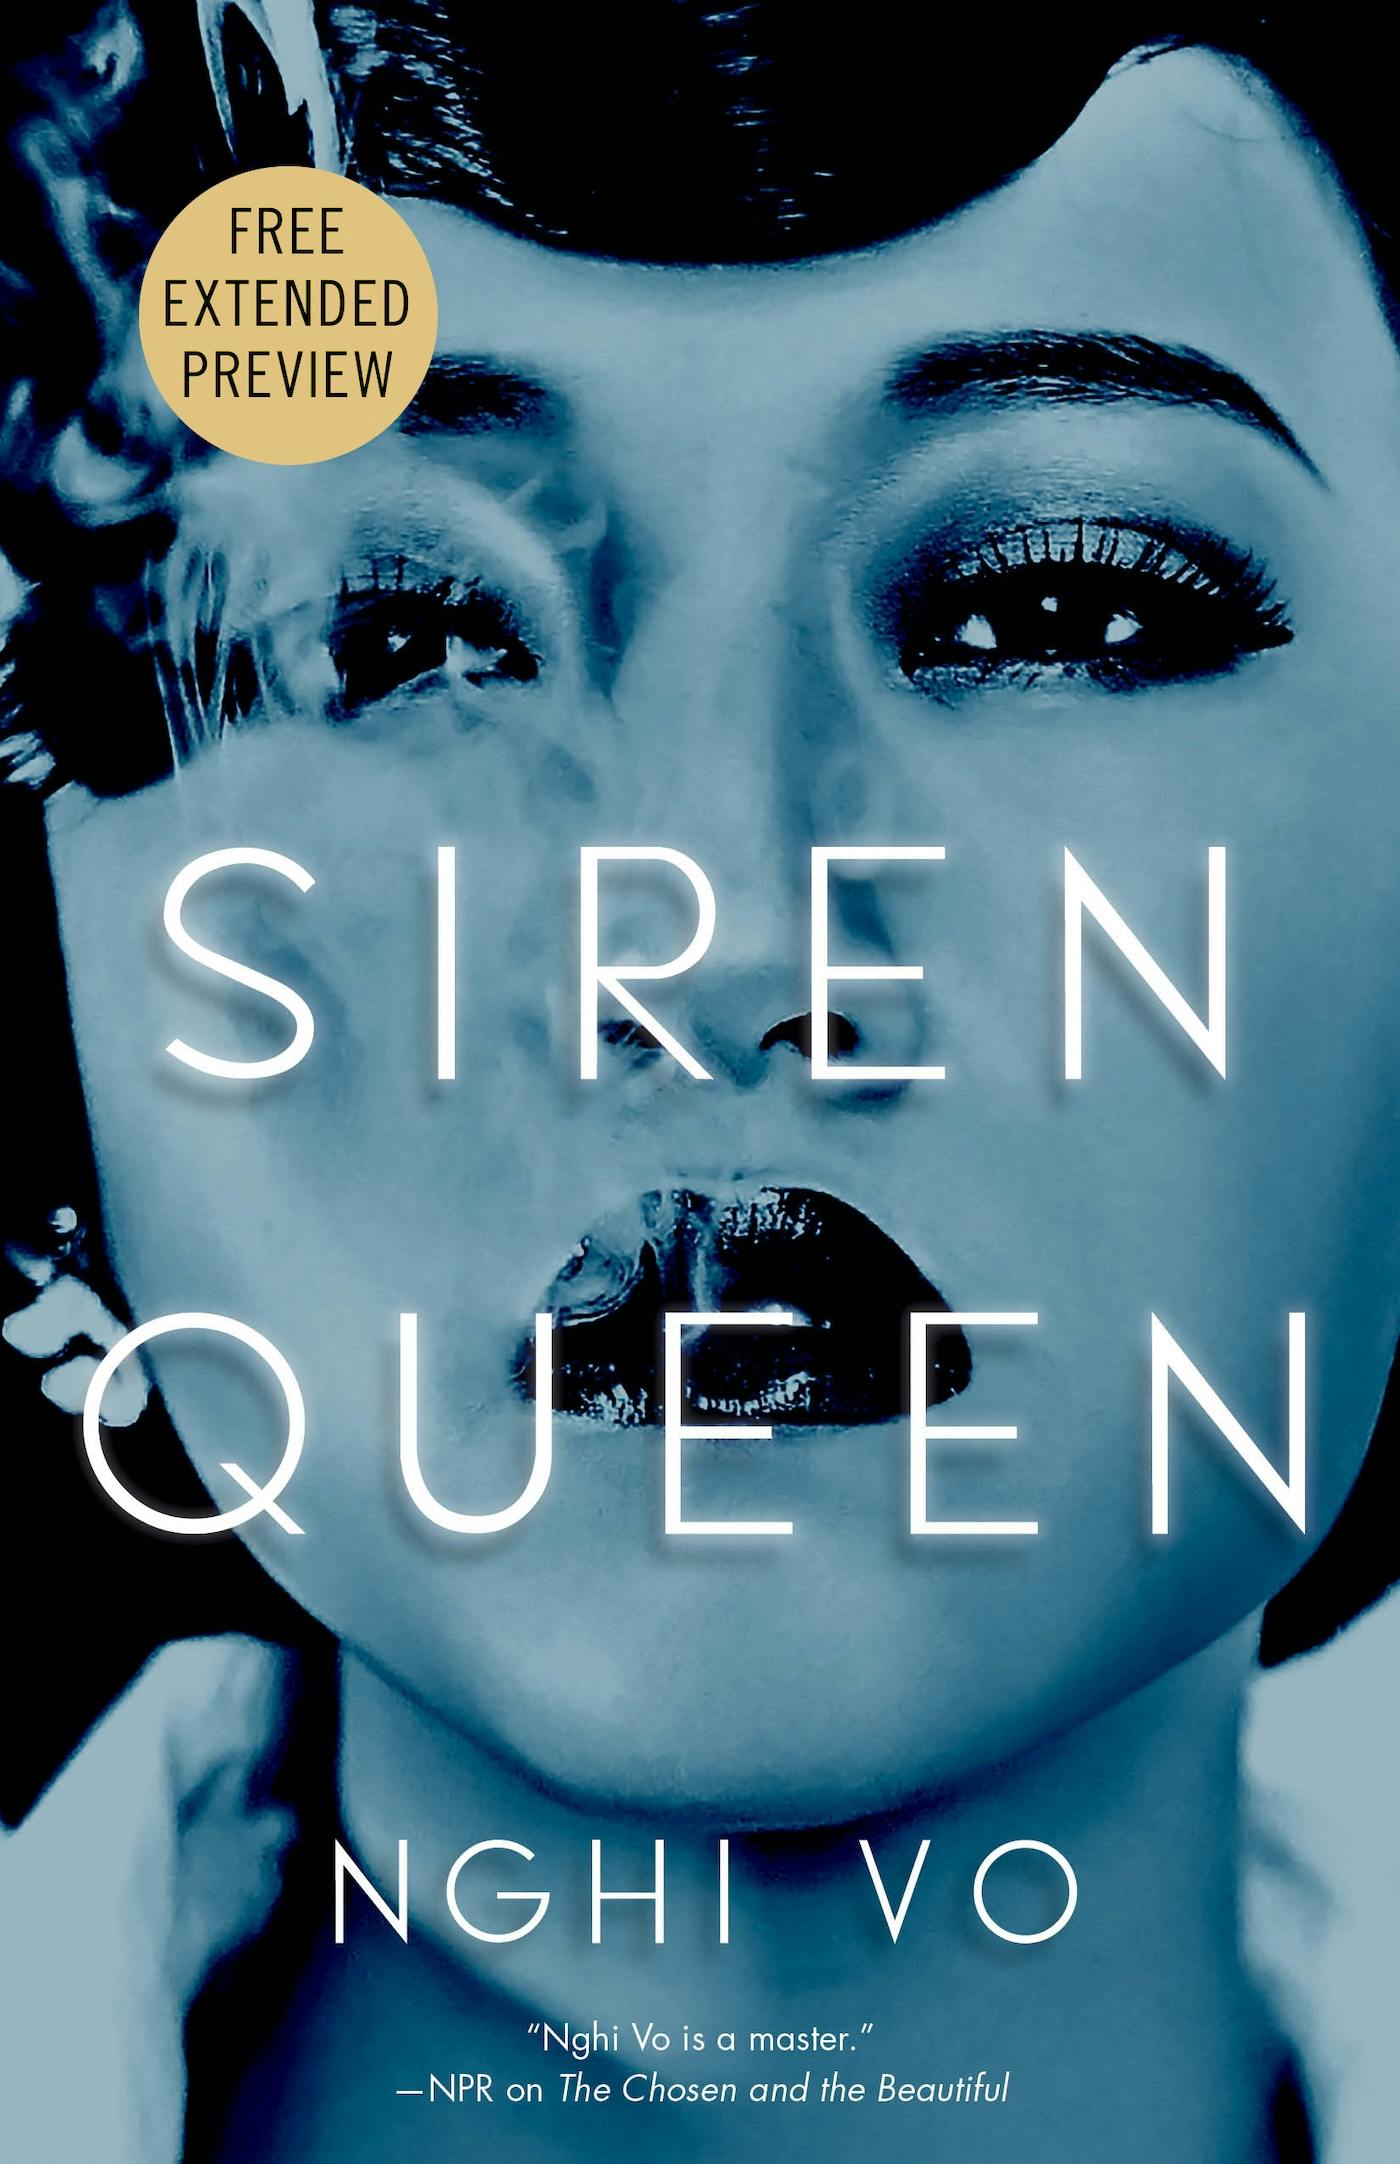 Cover for the book titled as: Siren Queen Sneak Peek